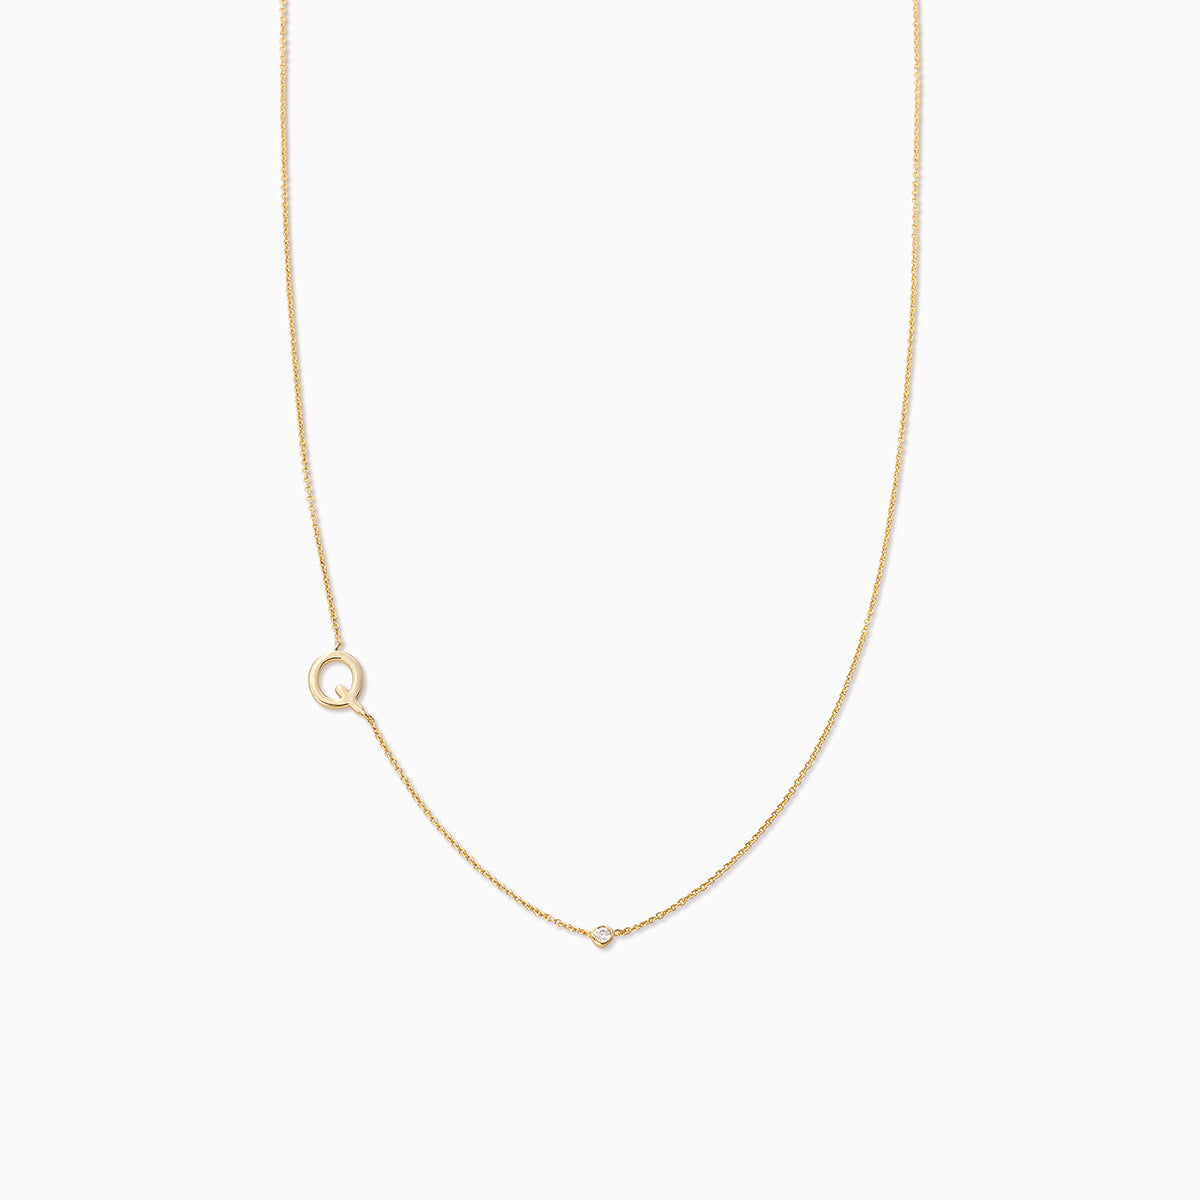 Personalized Touch Necklace | Gold Q| Product Image | Uncommon James